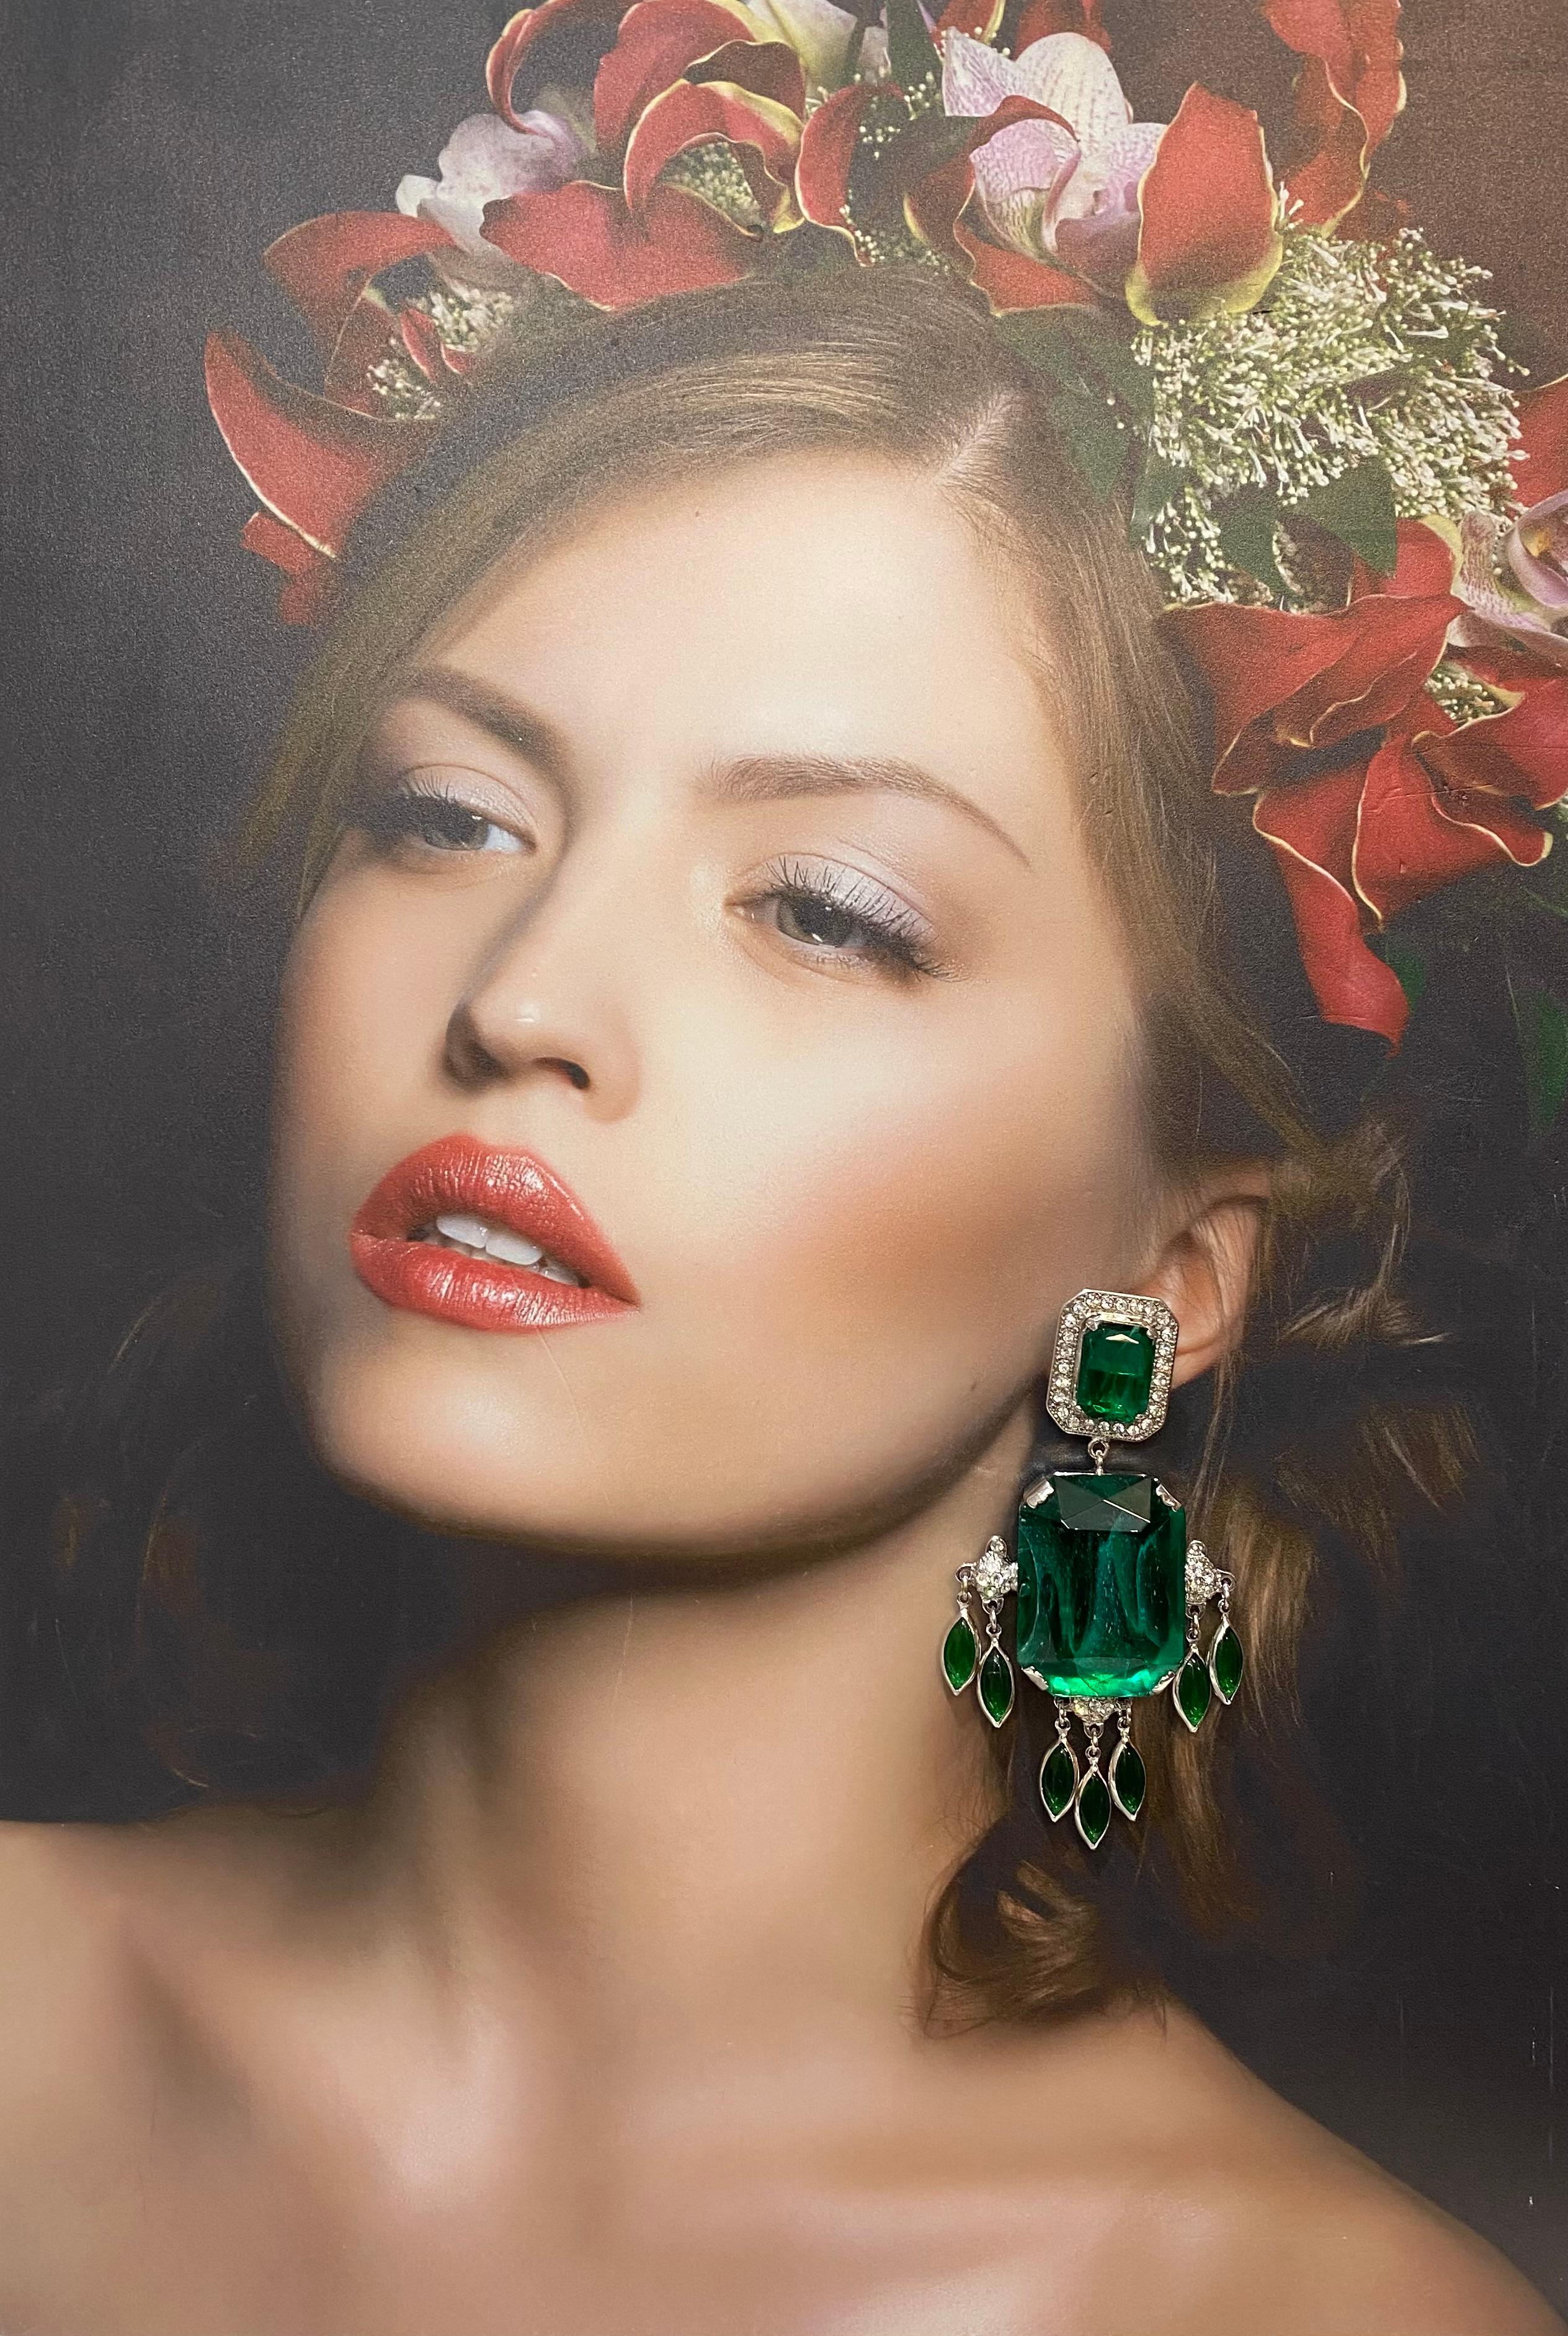 Stunning Carlo Zini bijoux earrings
Non allergenic rhodium
Wonderful construction of class A Swarovski crystals
Emerald like elements
Total length cm 10 (3.93 inches)
Clip on closure, pierced on request
100% Artisanal work
Worldwide express shipping